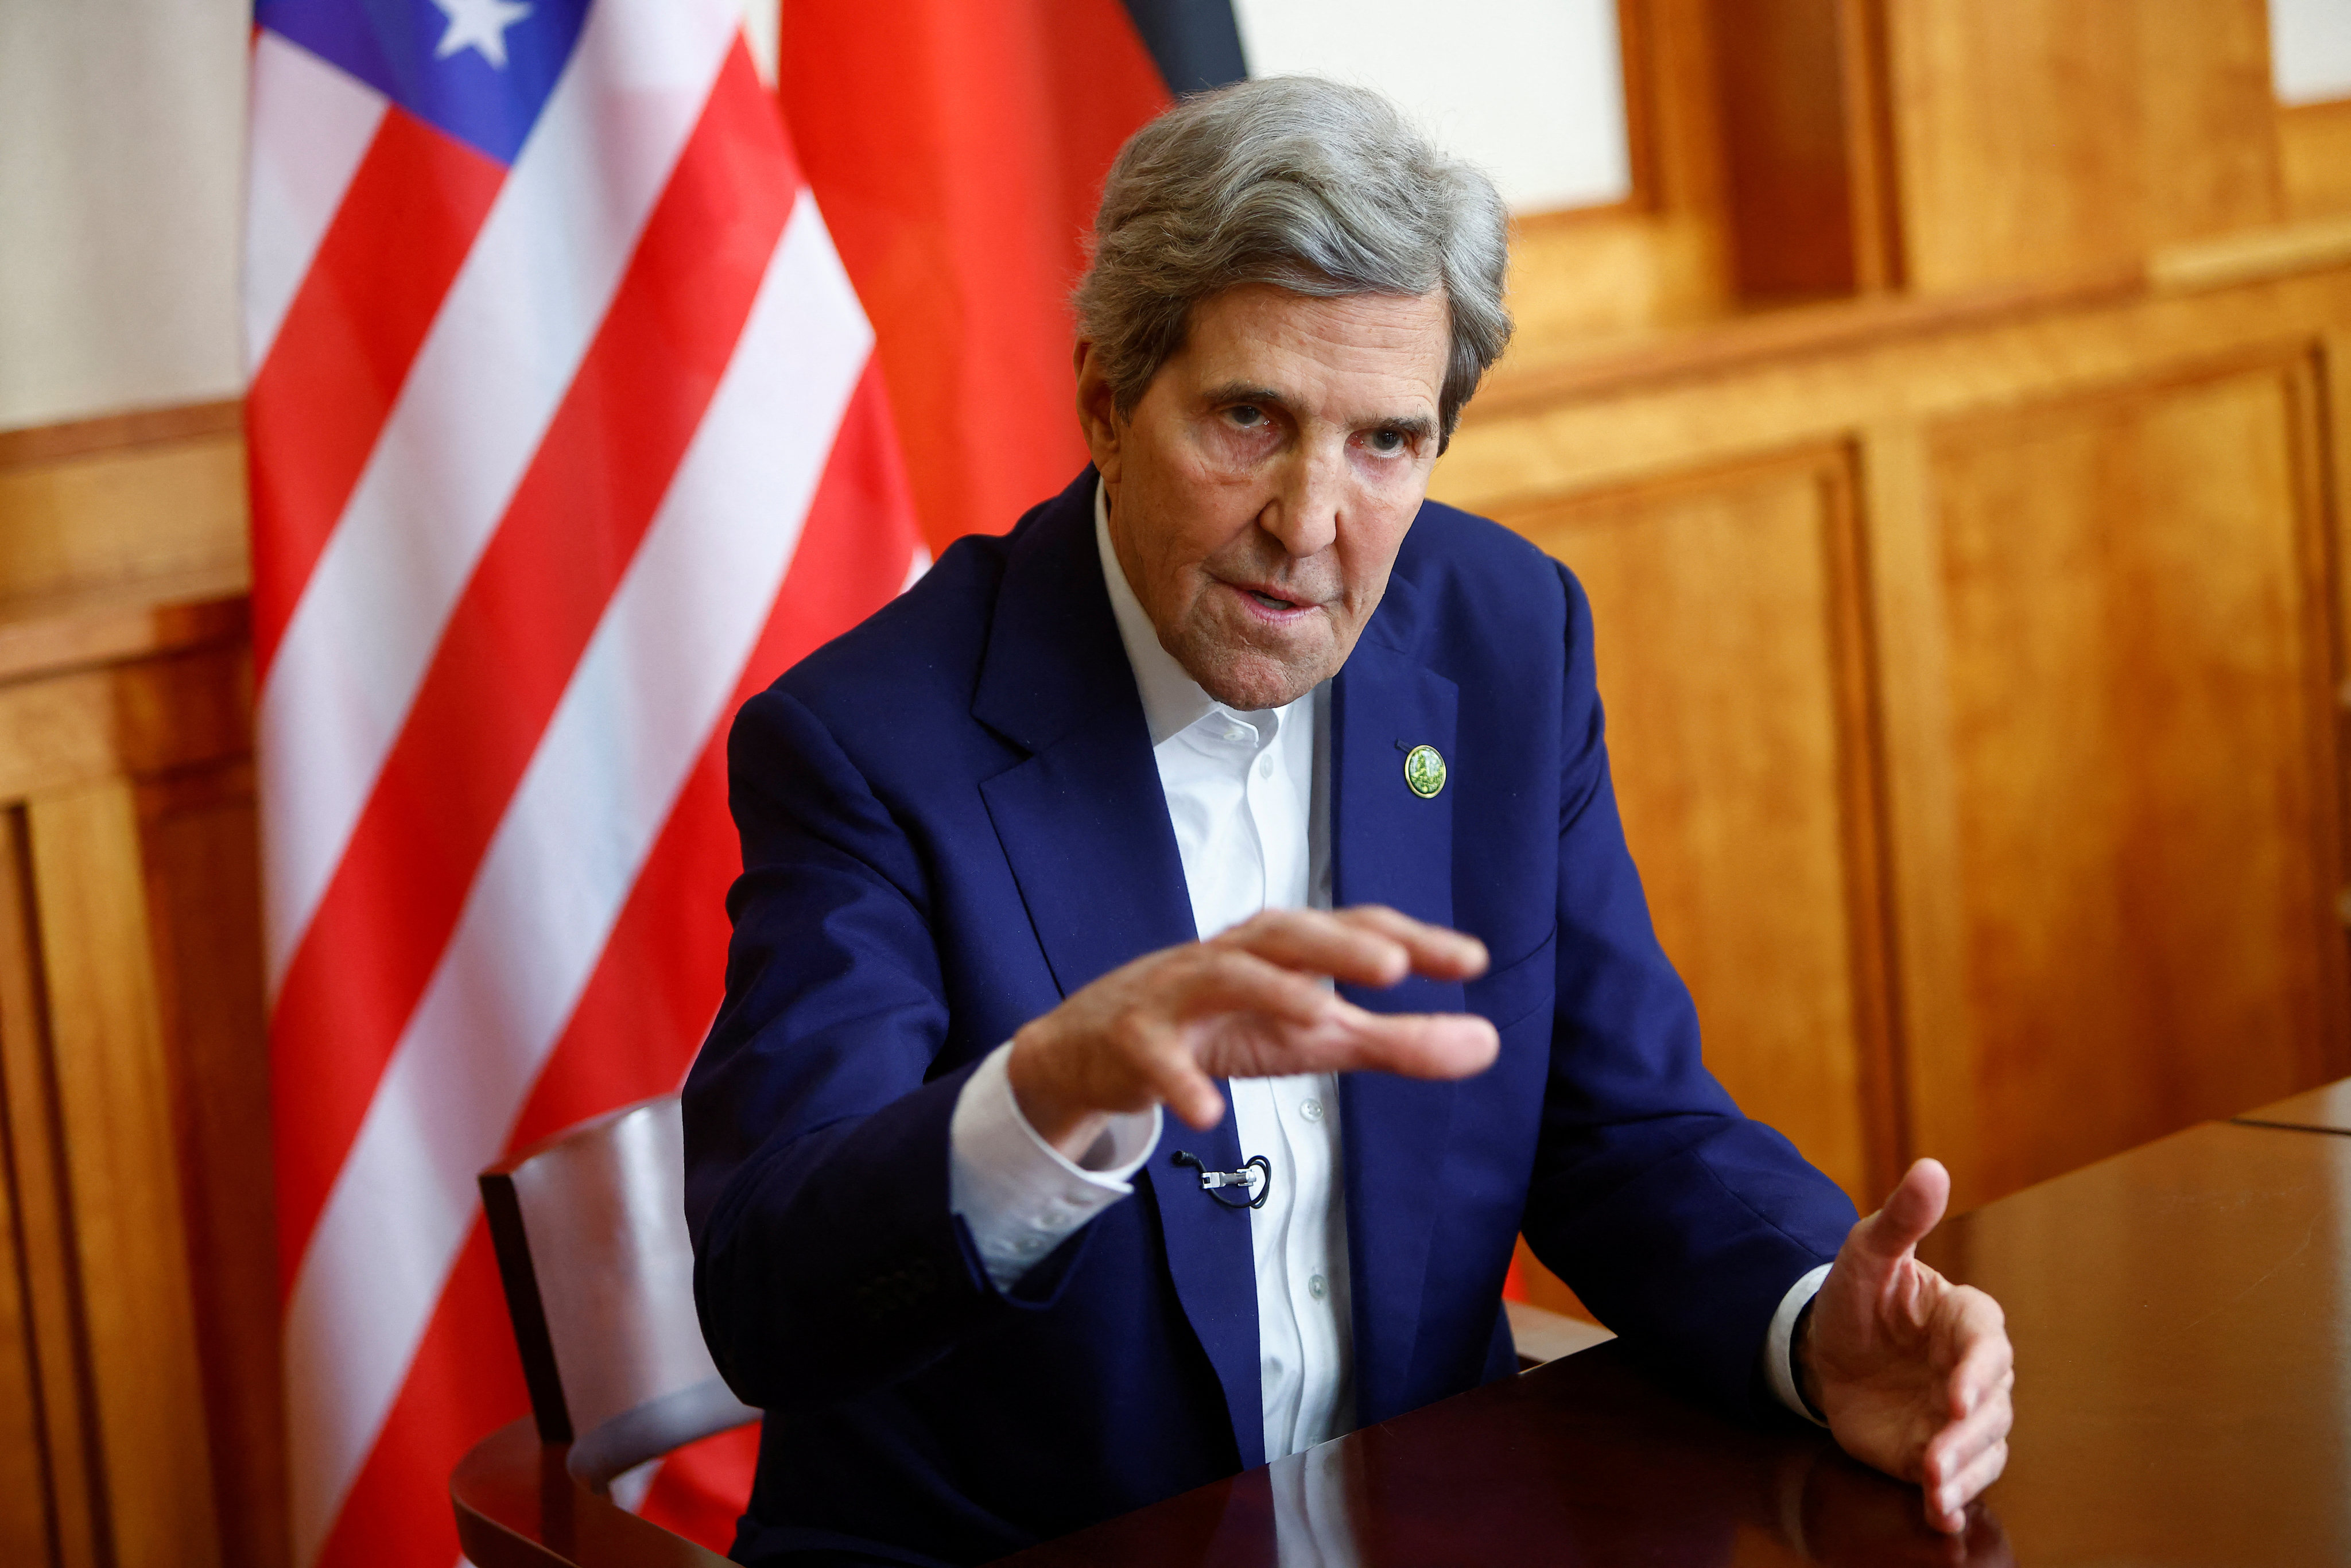 US Special Presidential Envoy for Climate John Kerry gives an interview in Berlin on Wednesday. Photo: Reuters